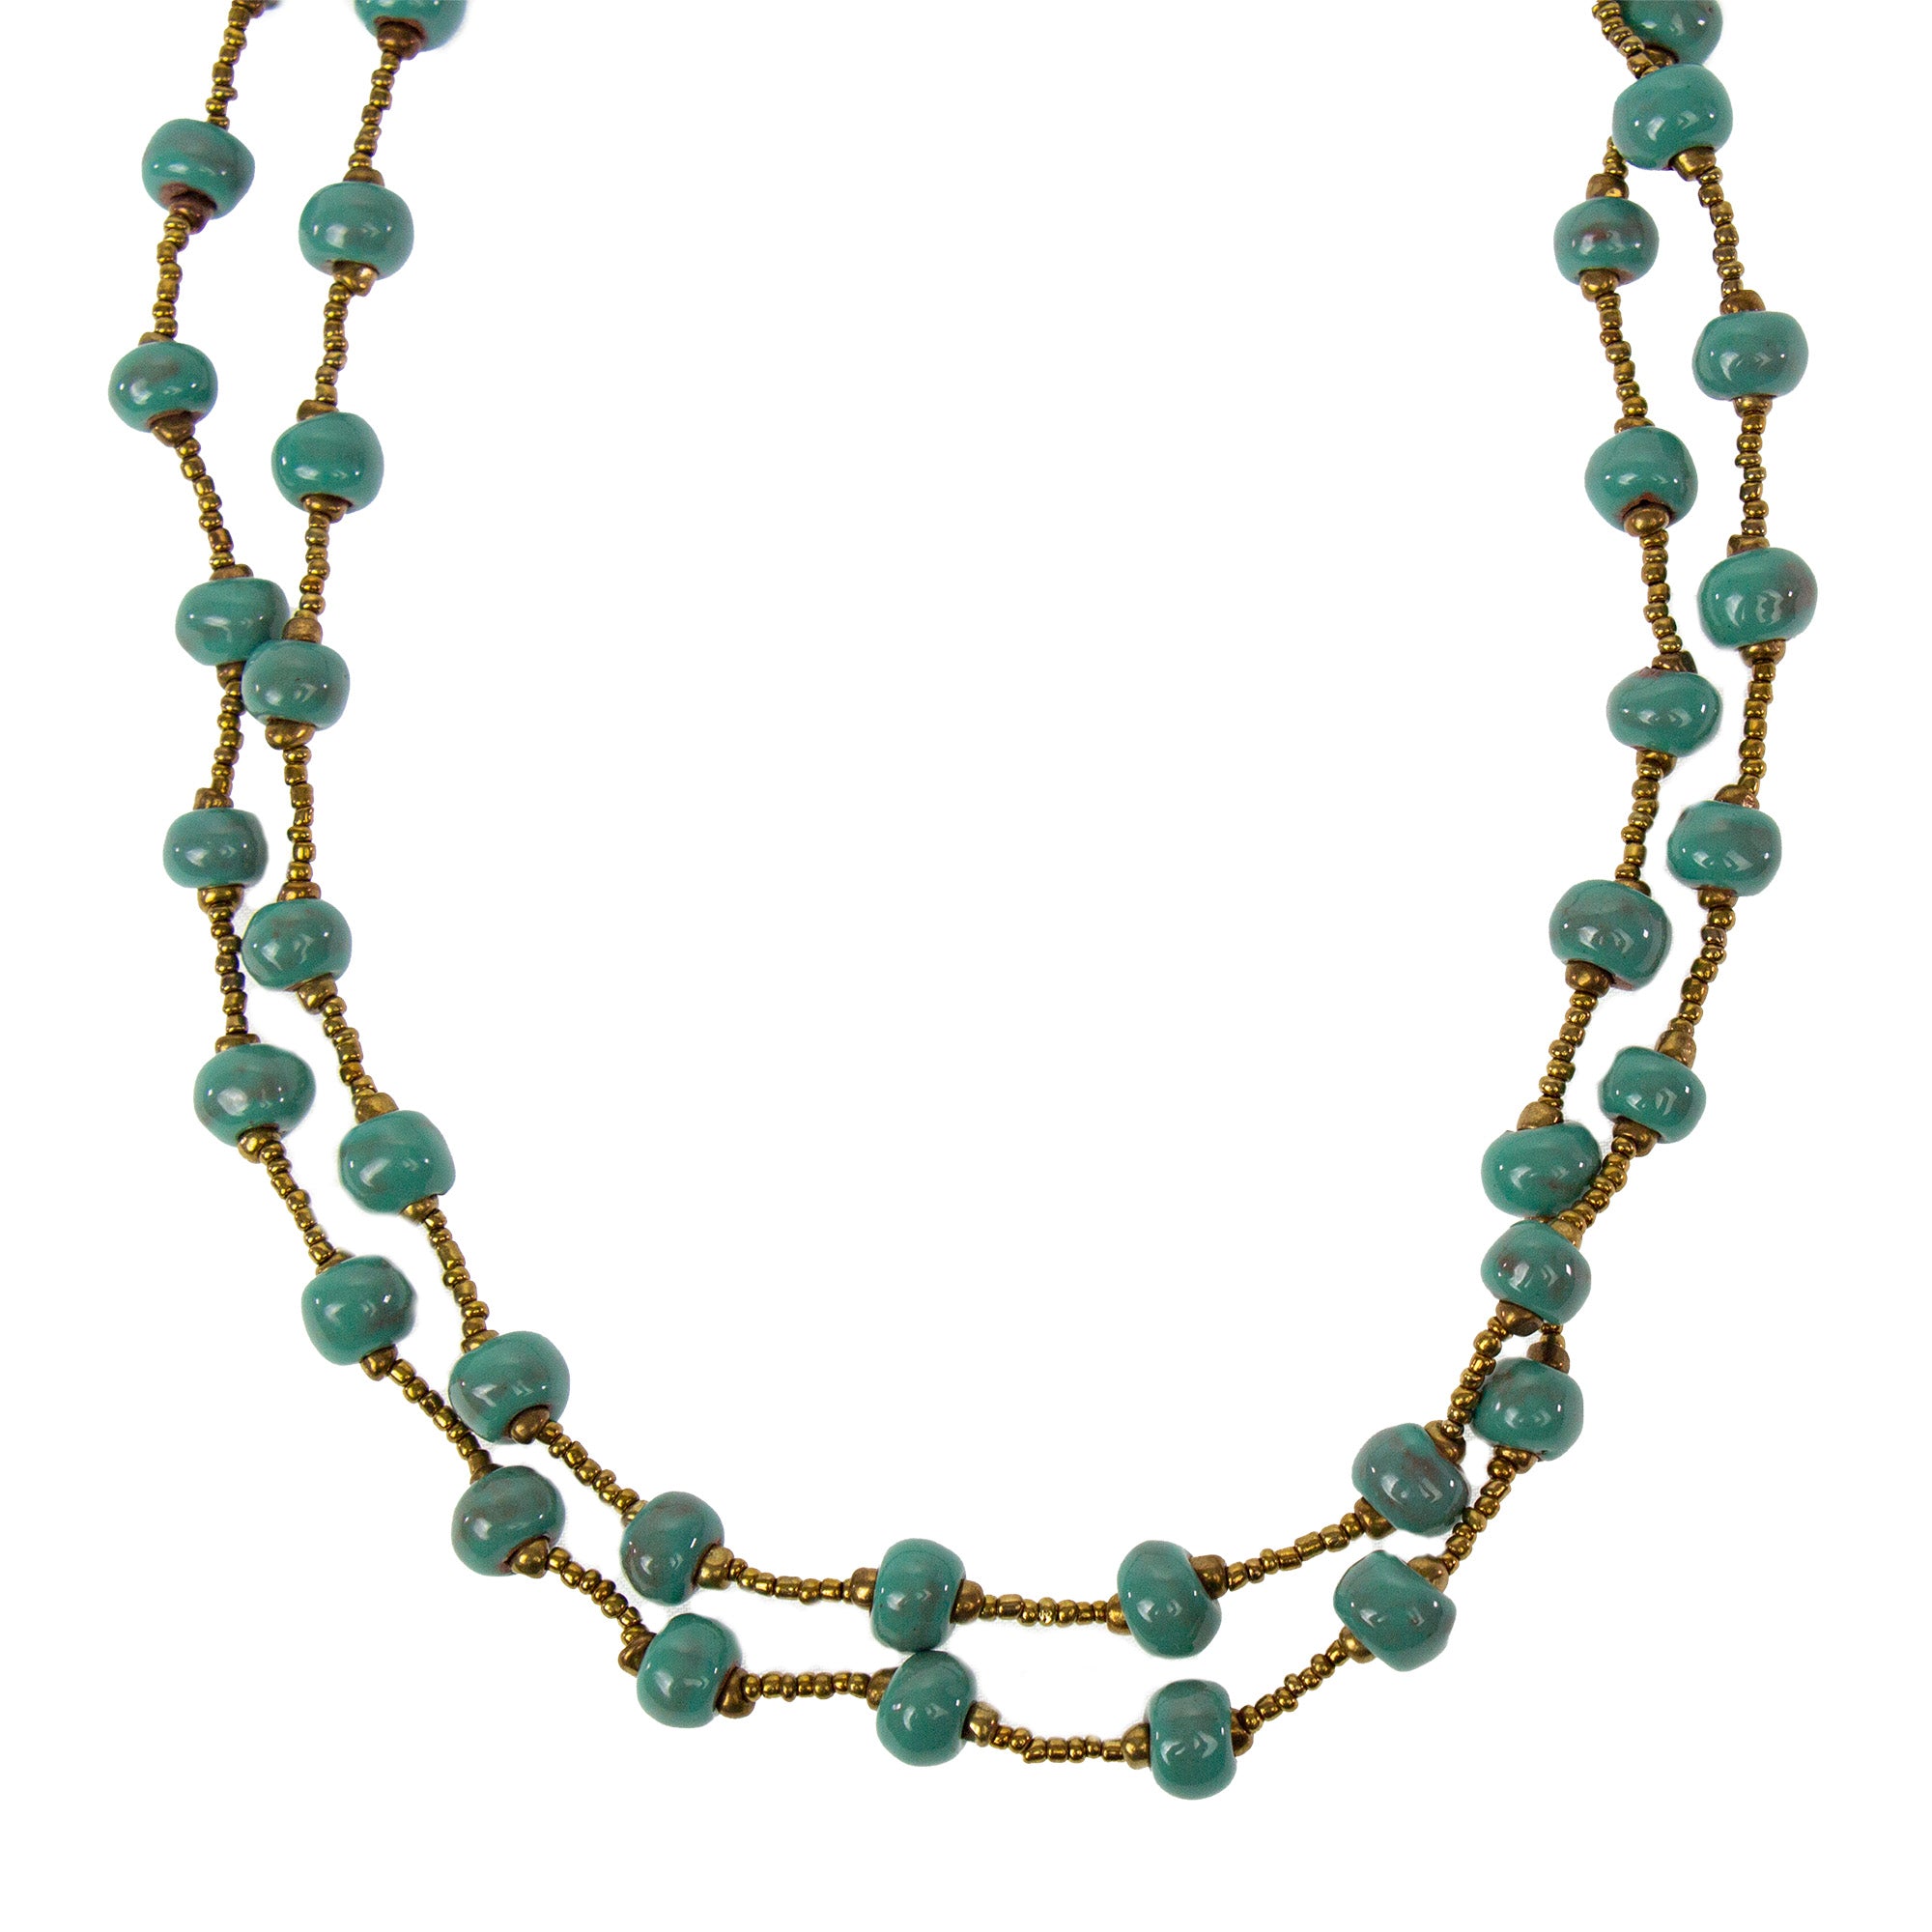 Handcrafted Clay Bead Long Necklace from Haitian Artisans, Green